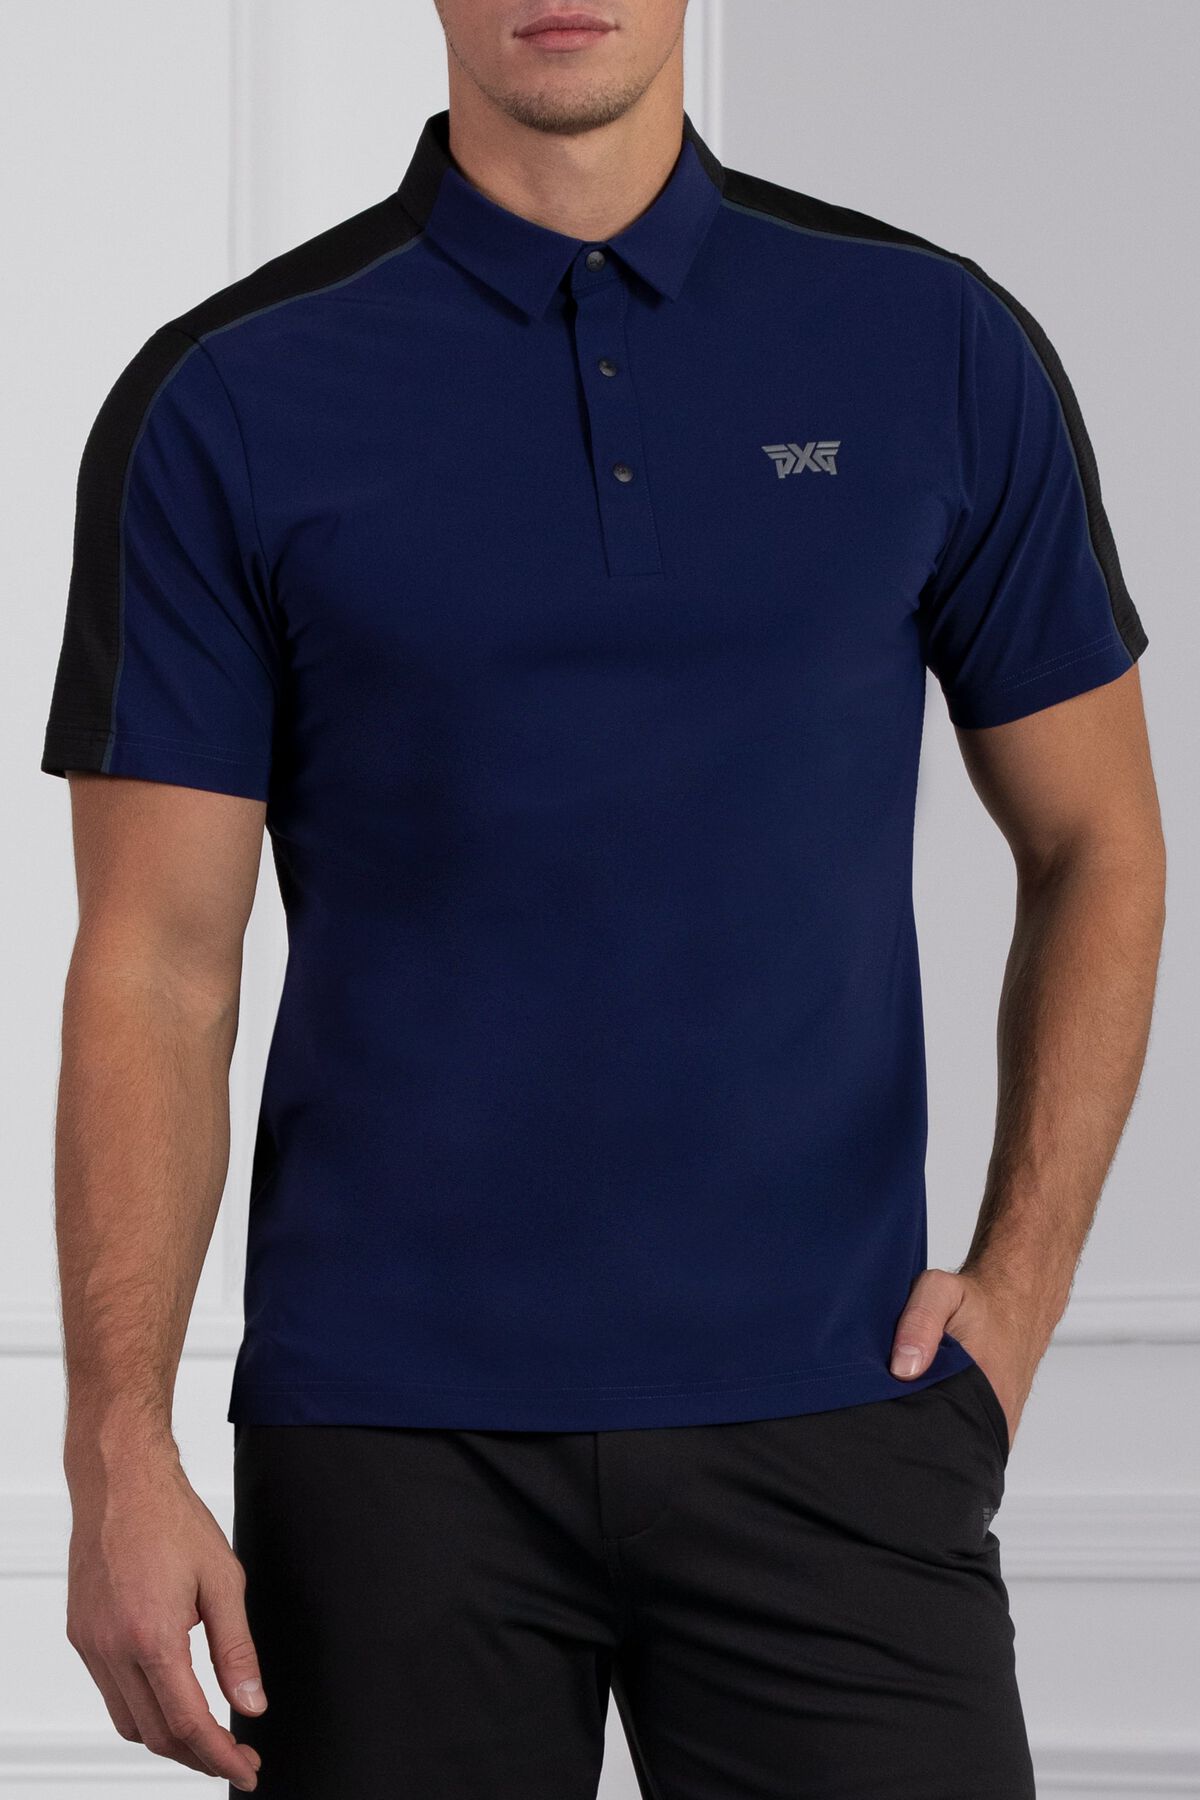 Athletic Fit BP Hybrid Polo  Shop the Highest Quality Golf Apparel, Gear,  Accessories and Golf Clubs at PXG